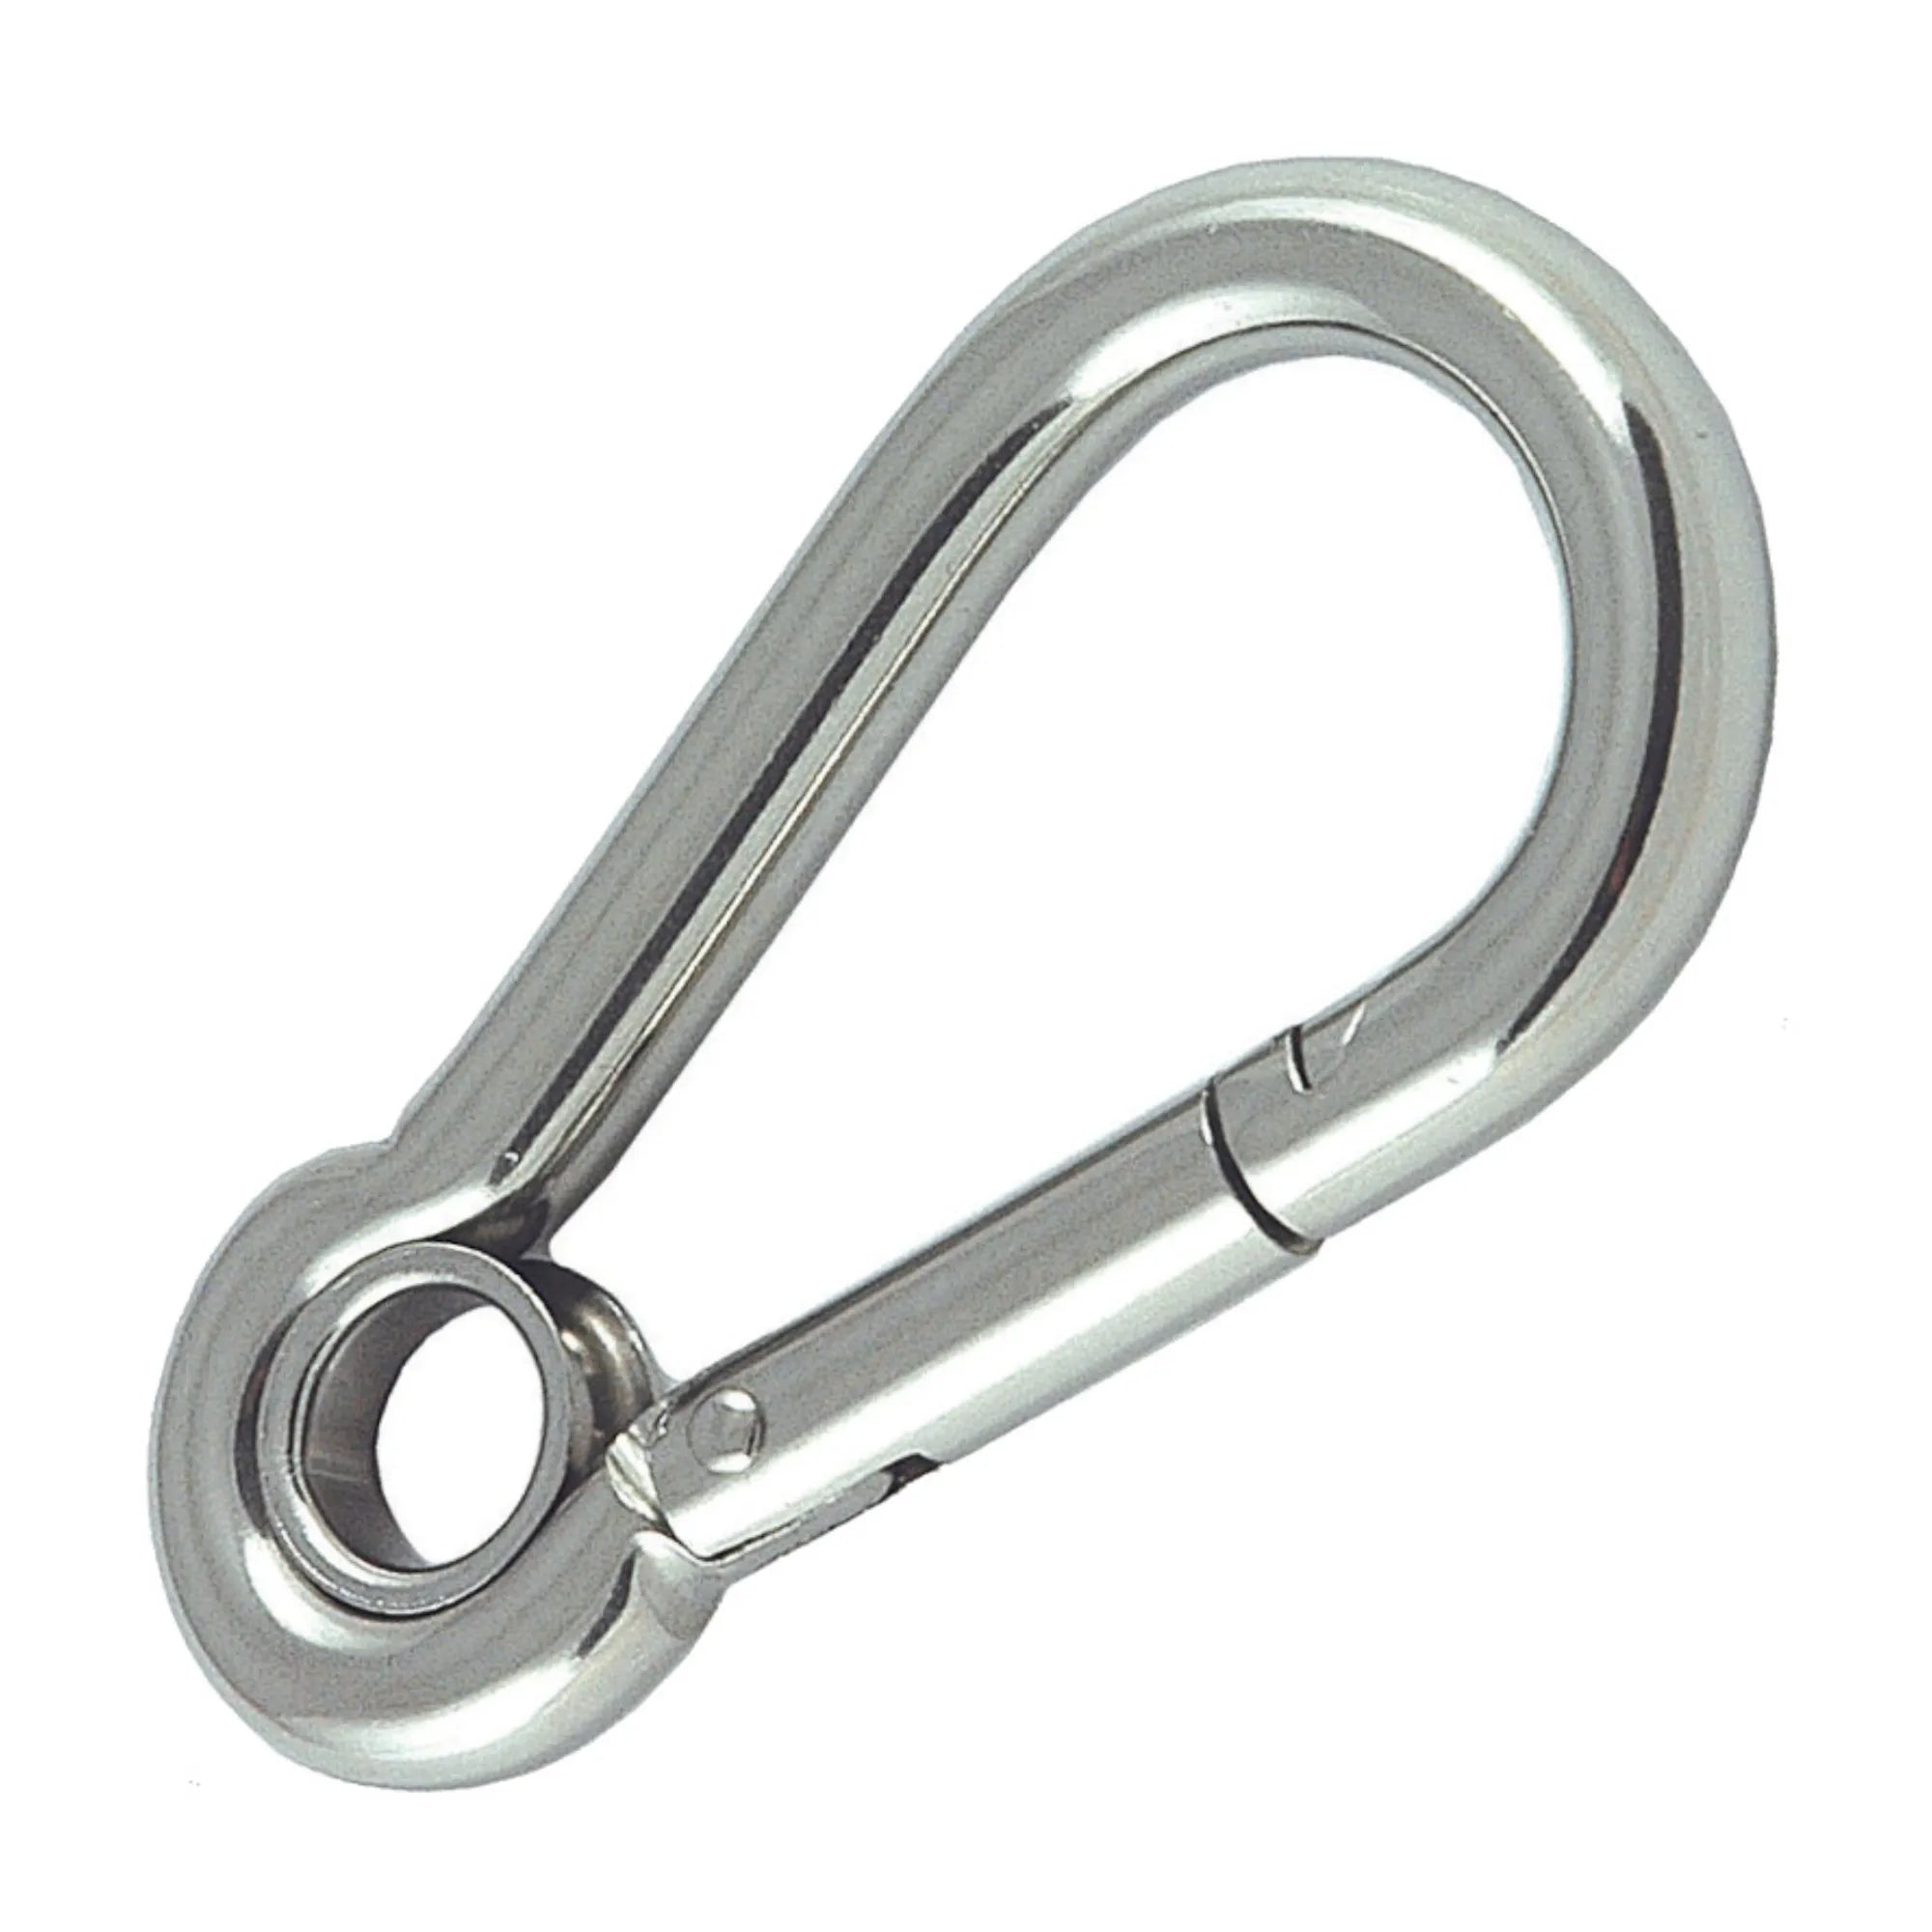 Stainless Steel Carabiner with Eye